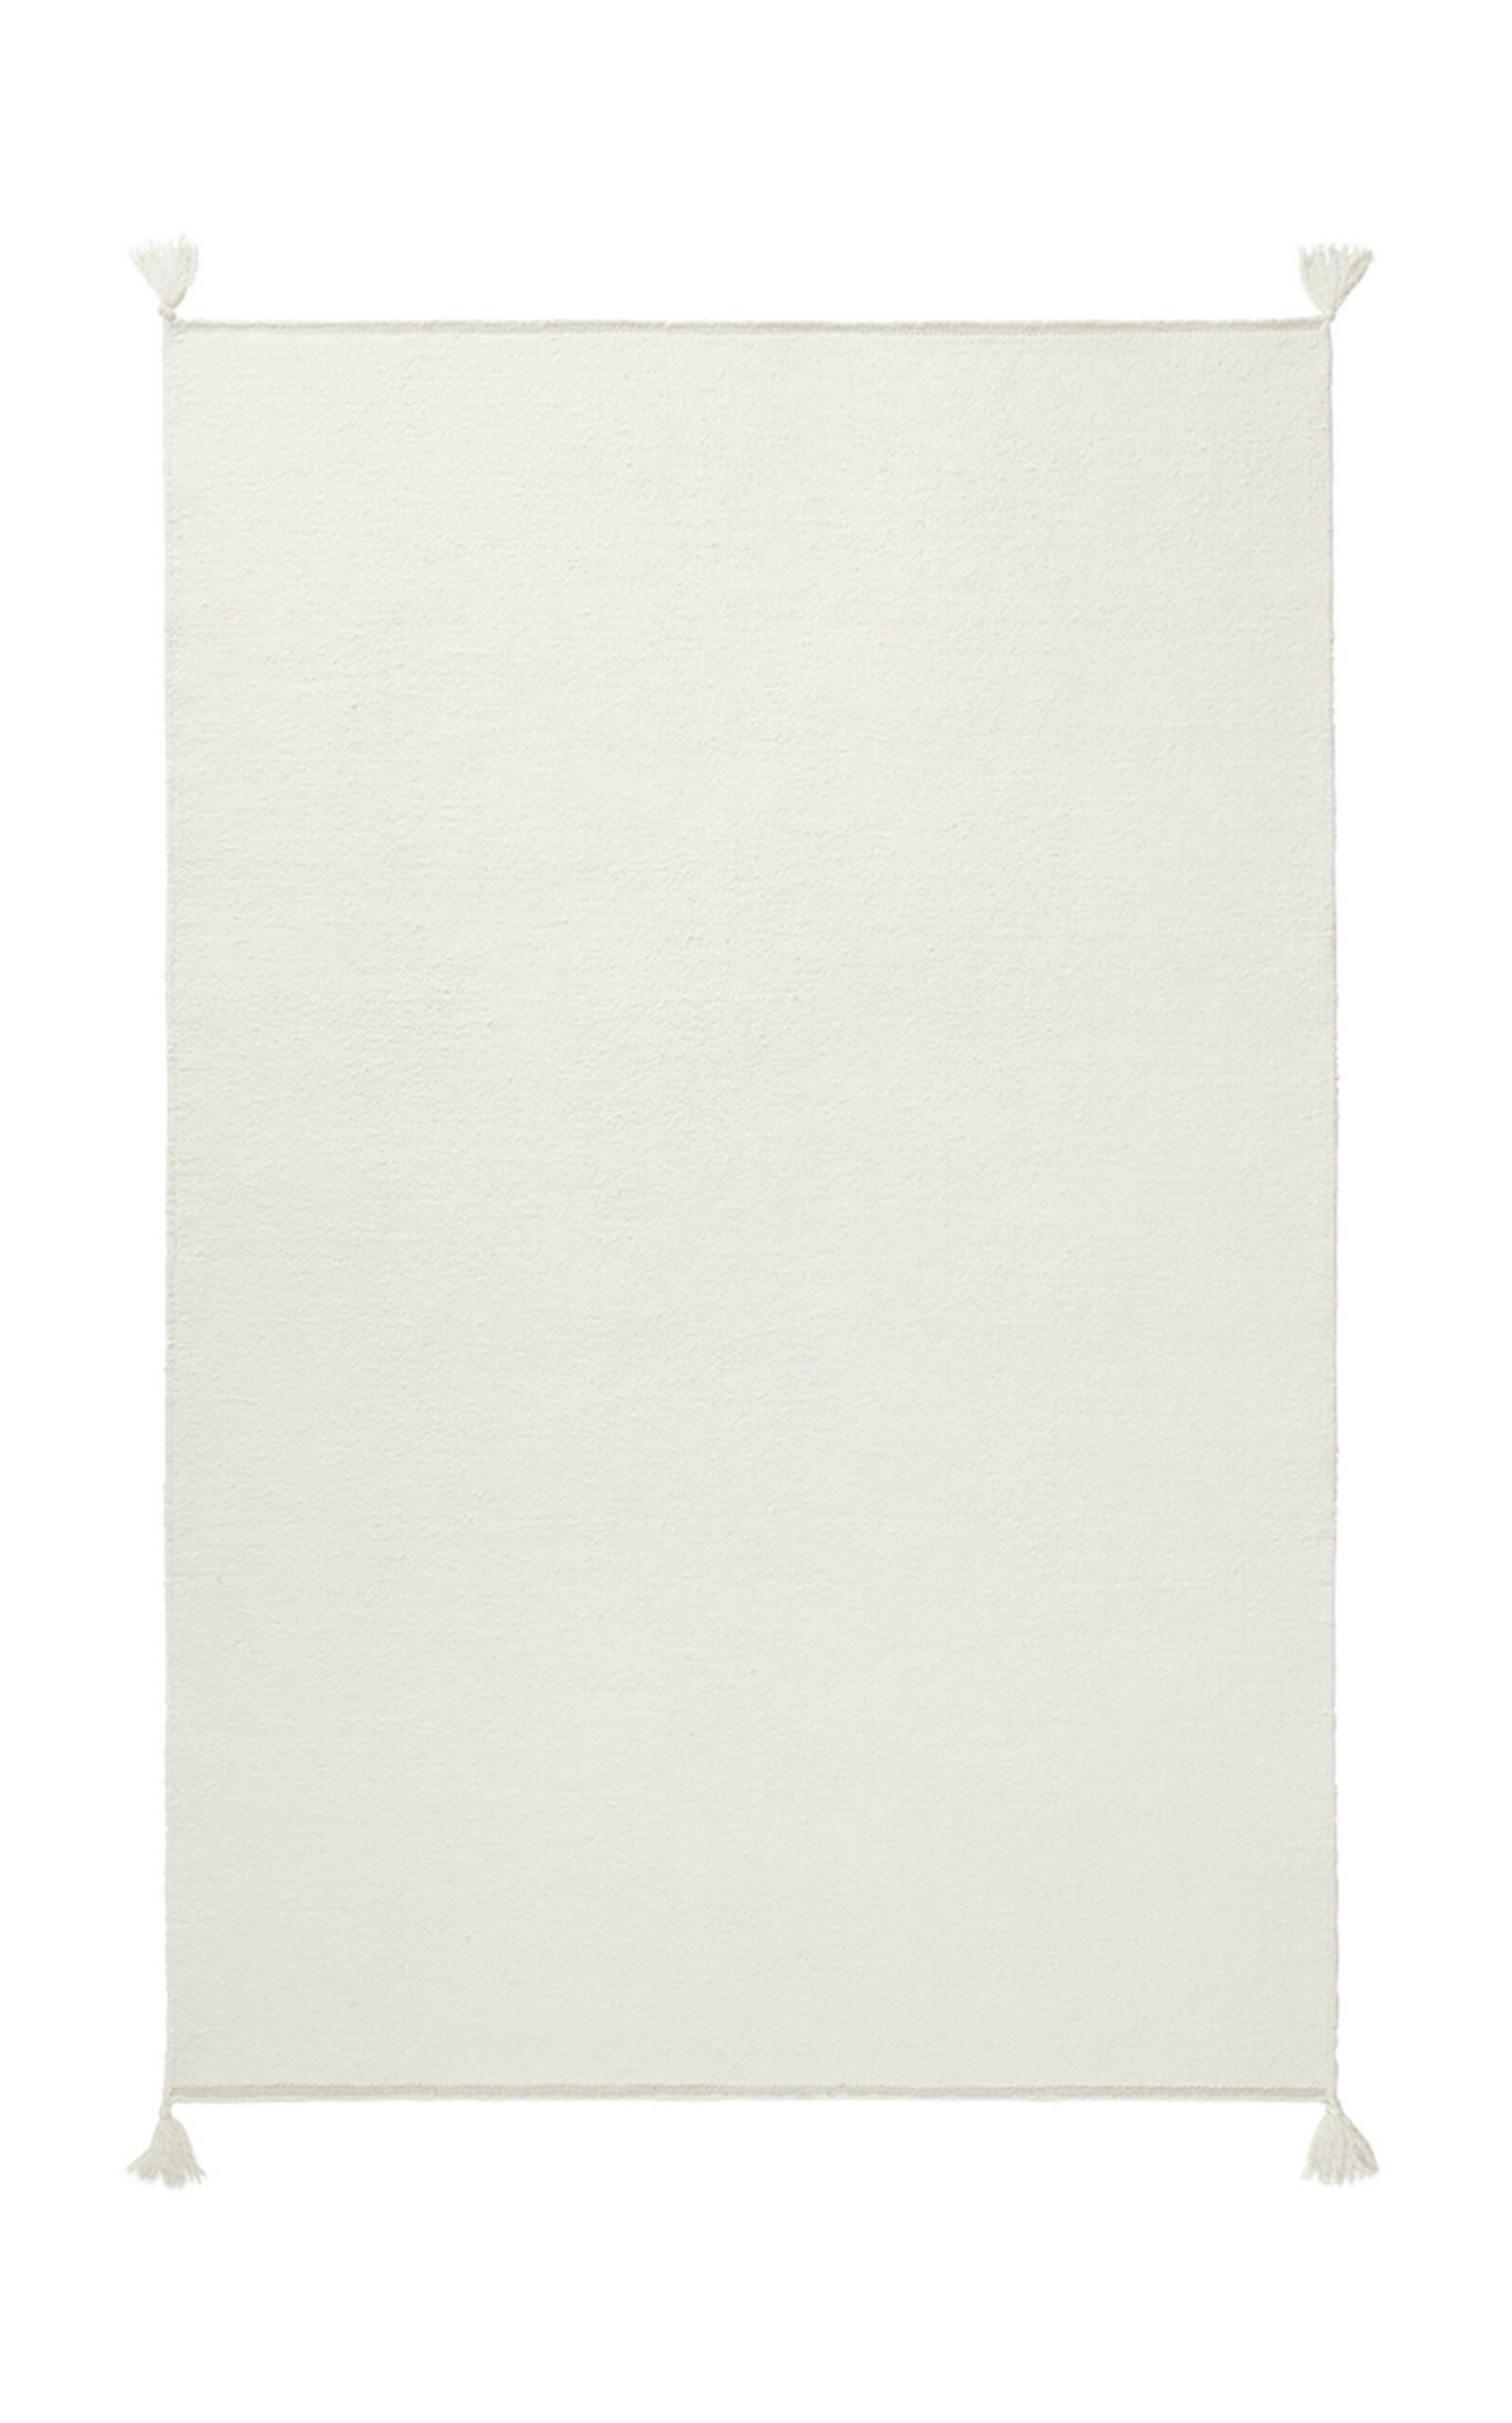 Nordic Knots Merino By ; Flatweave Area Rug In Natural White; Size 9' X 12' In Off-white